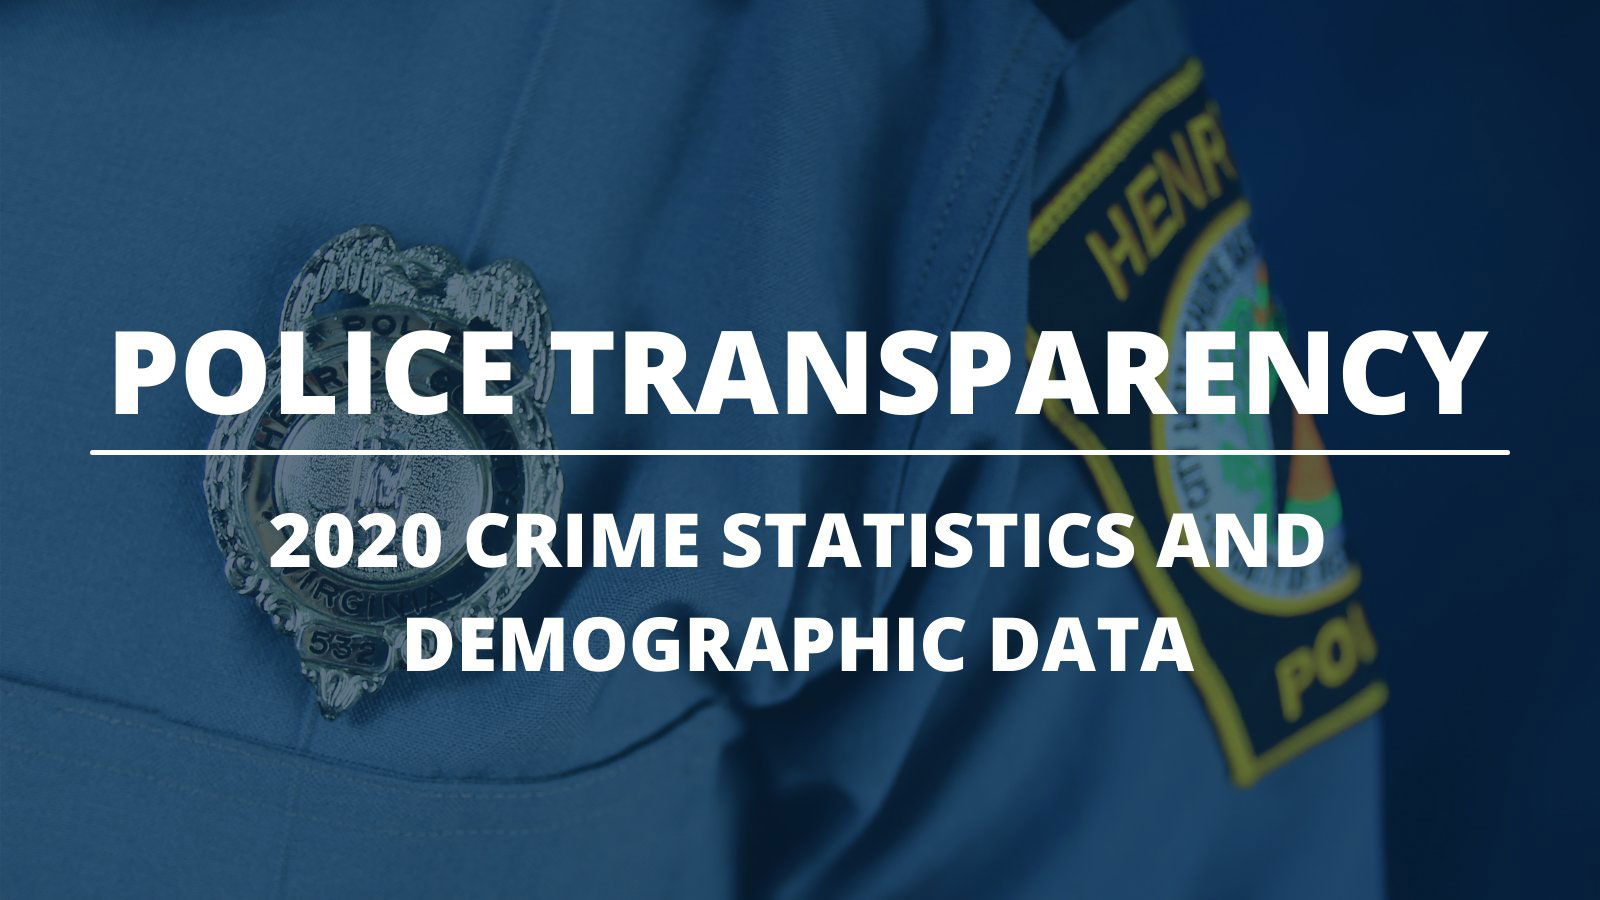 Police transparency - 2020 crime stats and demo data